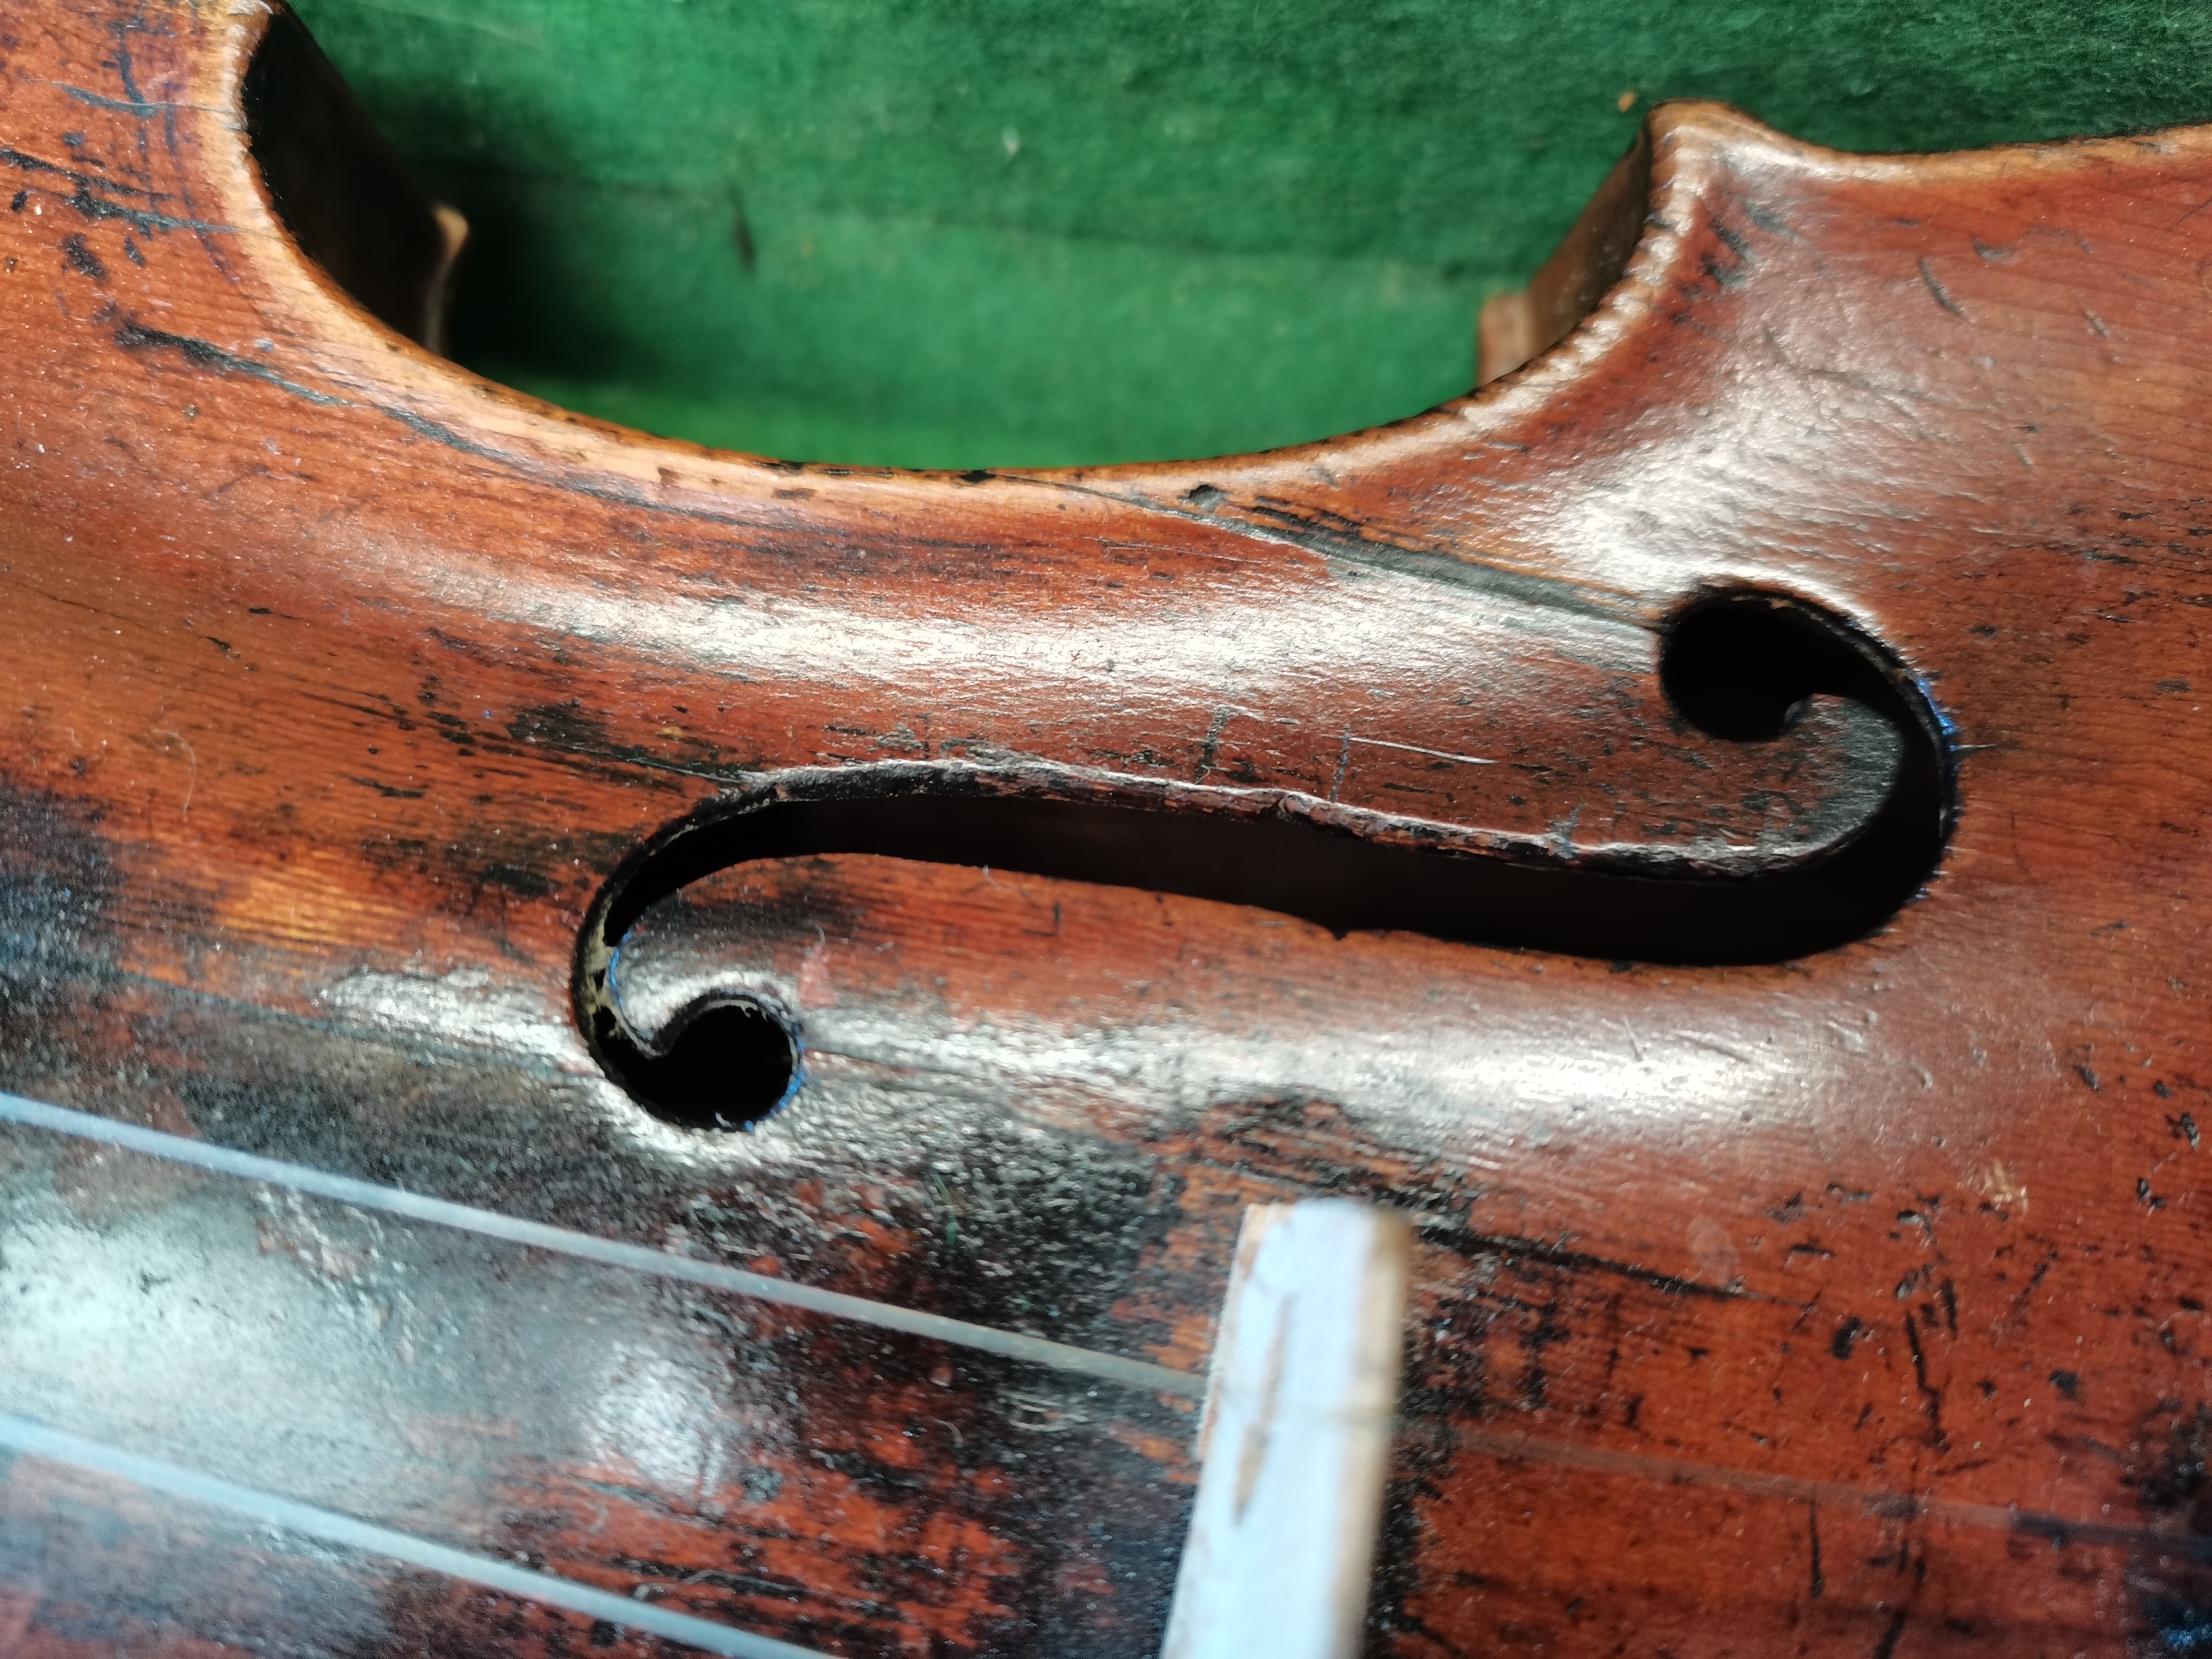 Violin and Bow In Case - Image 4 of 10